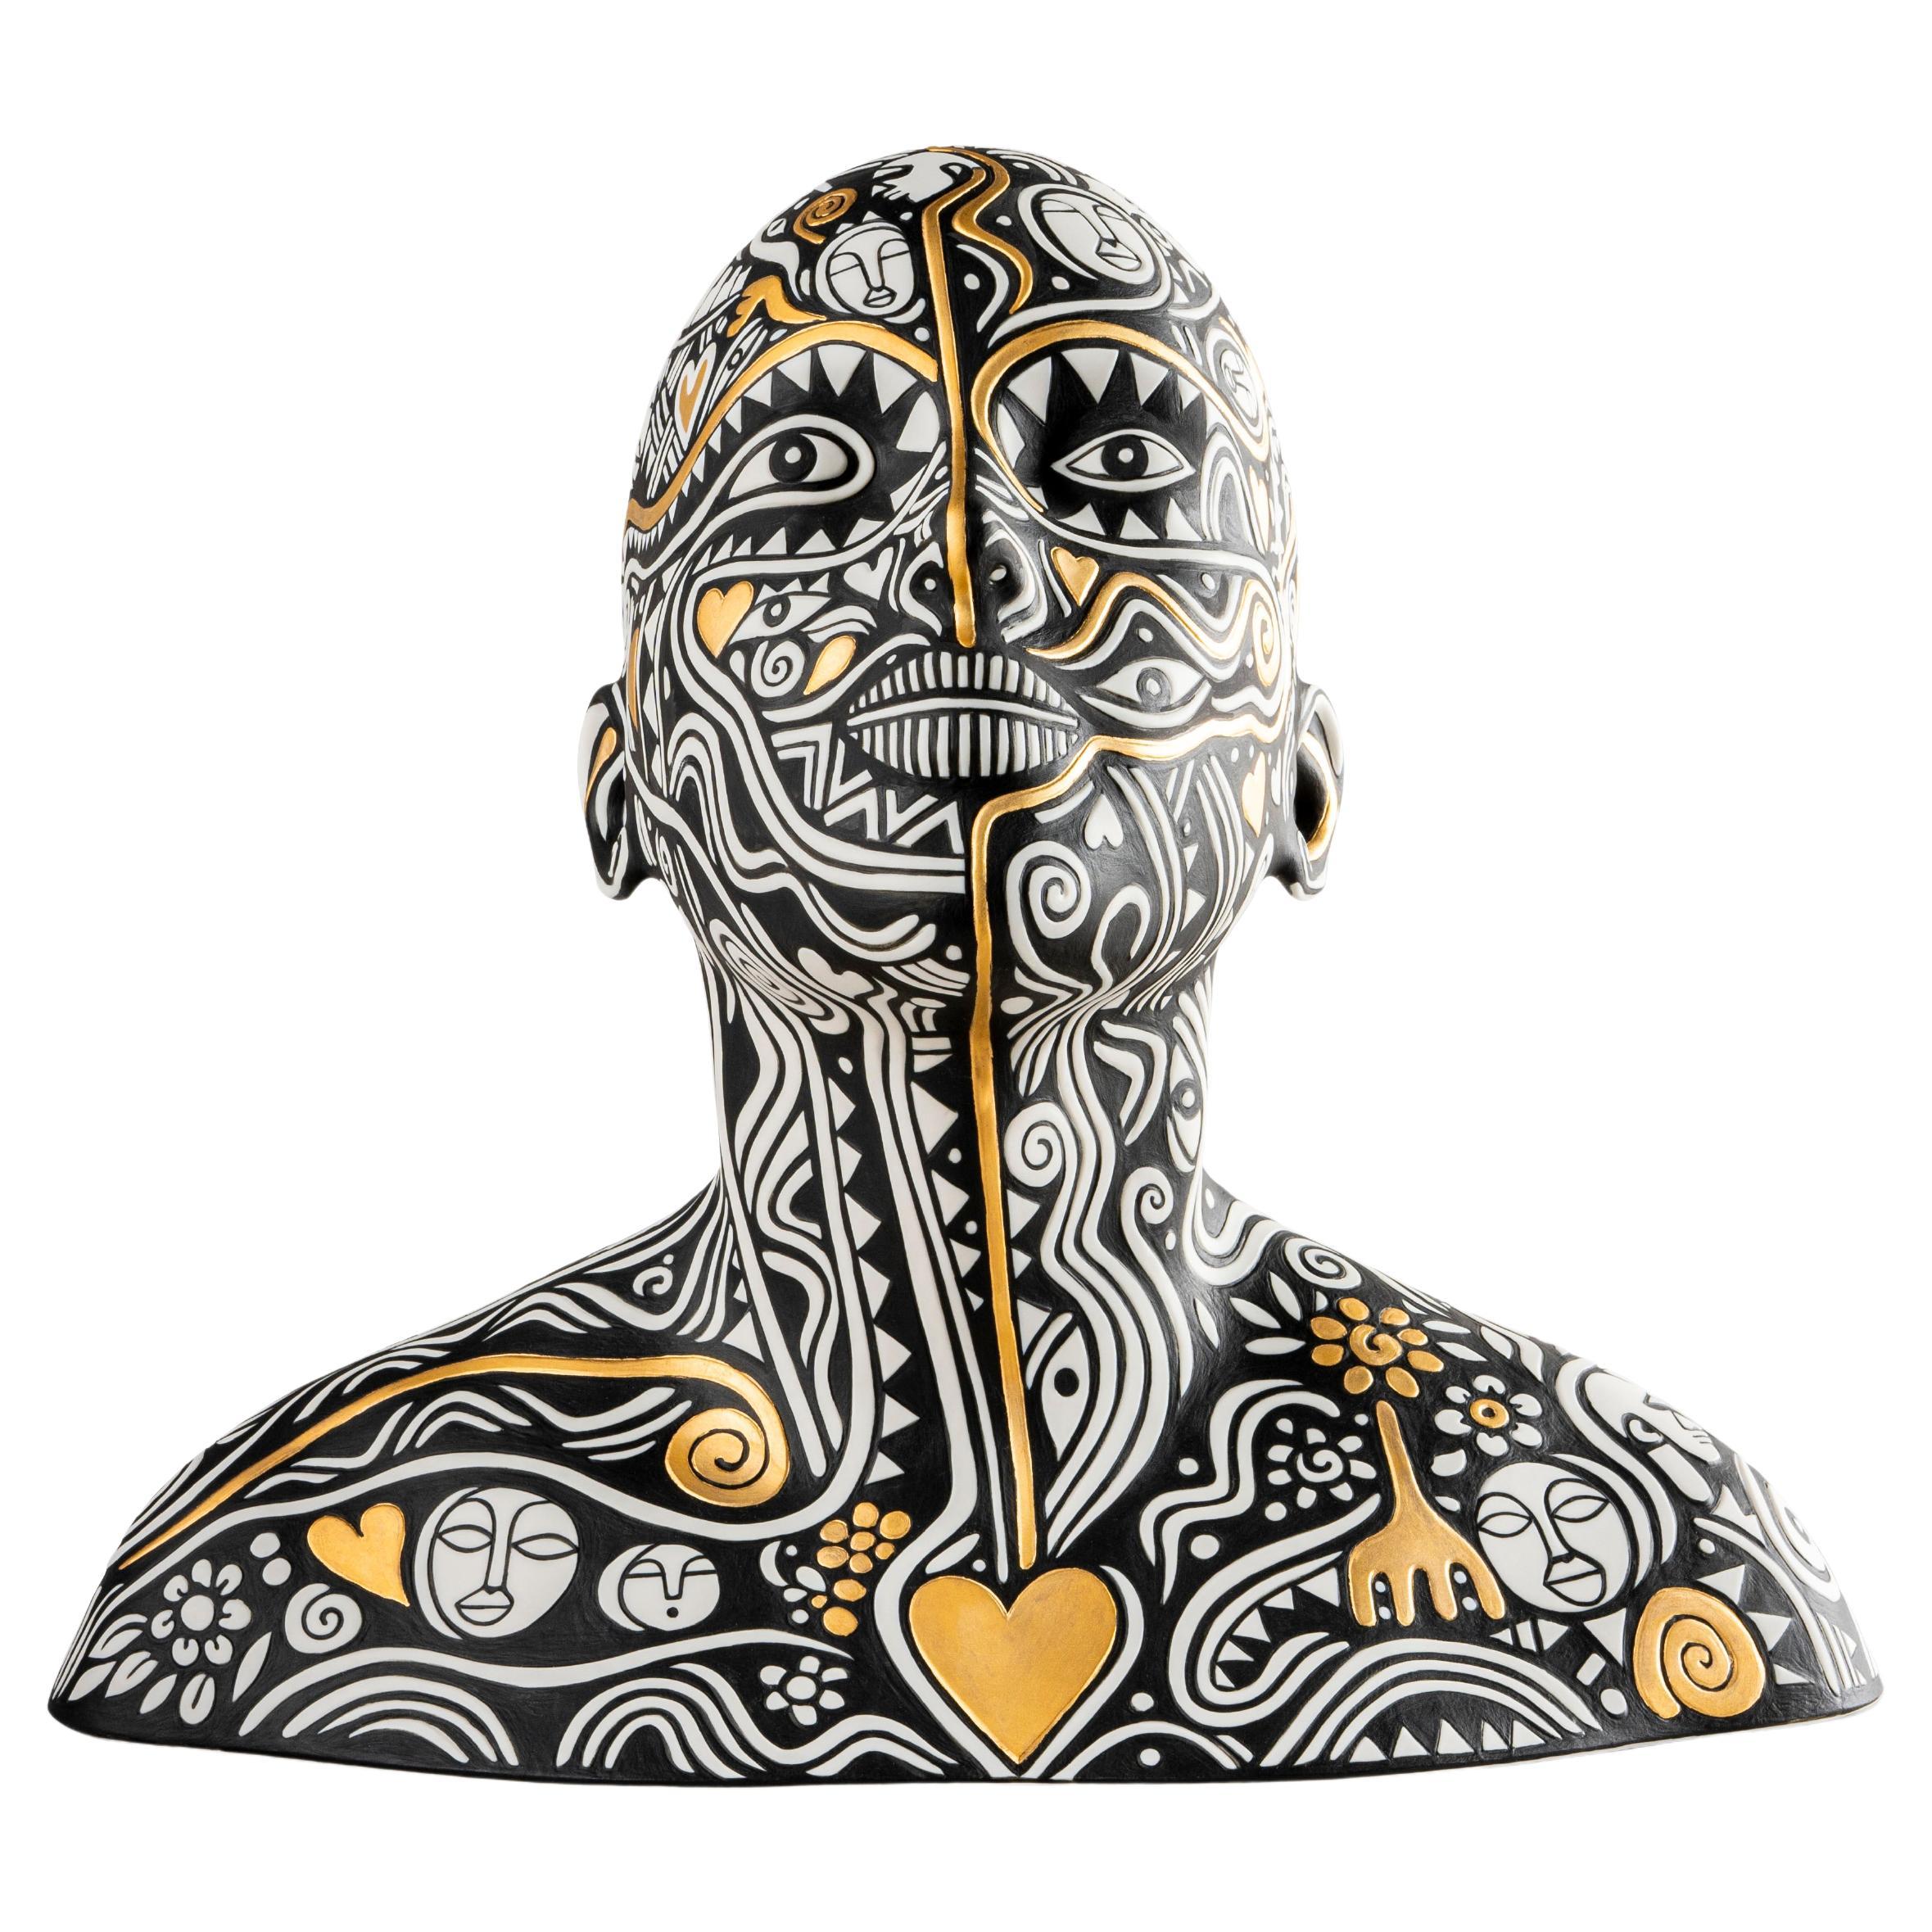 The Dreamer by Laolu - bust Sculpture. Limited Edition